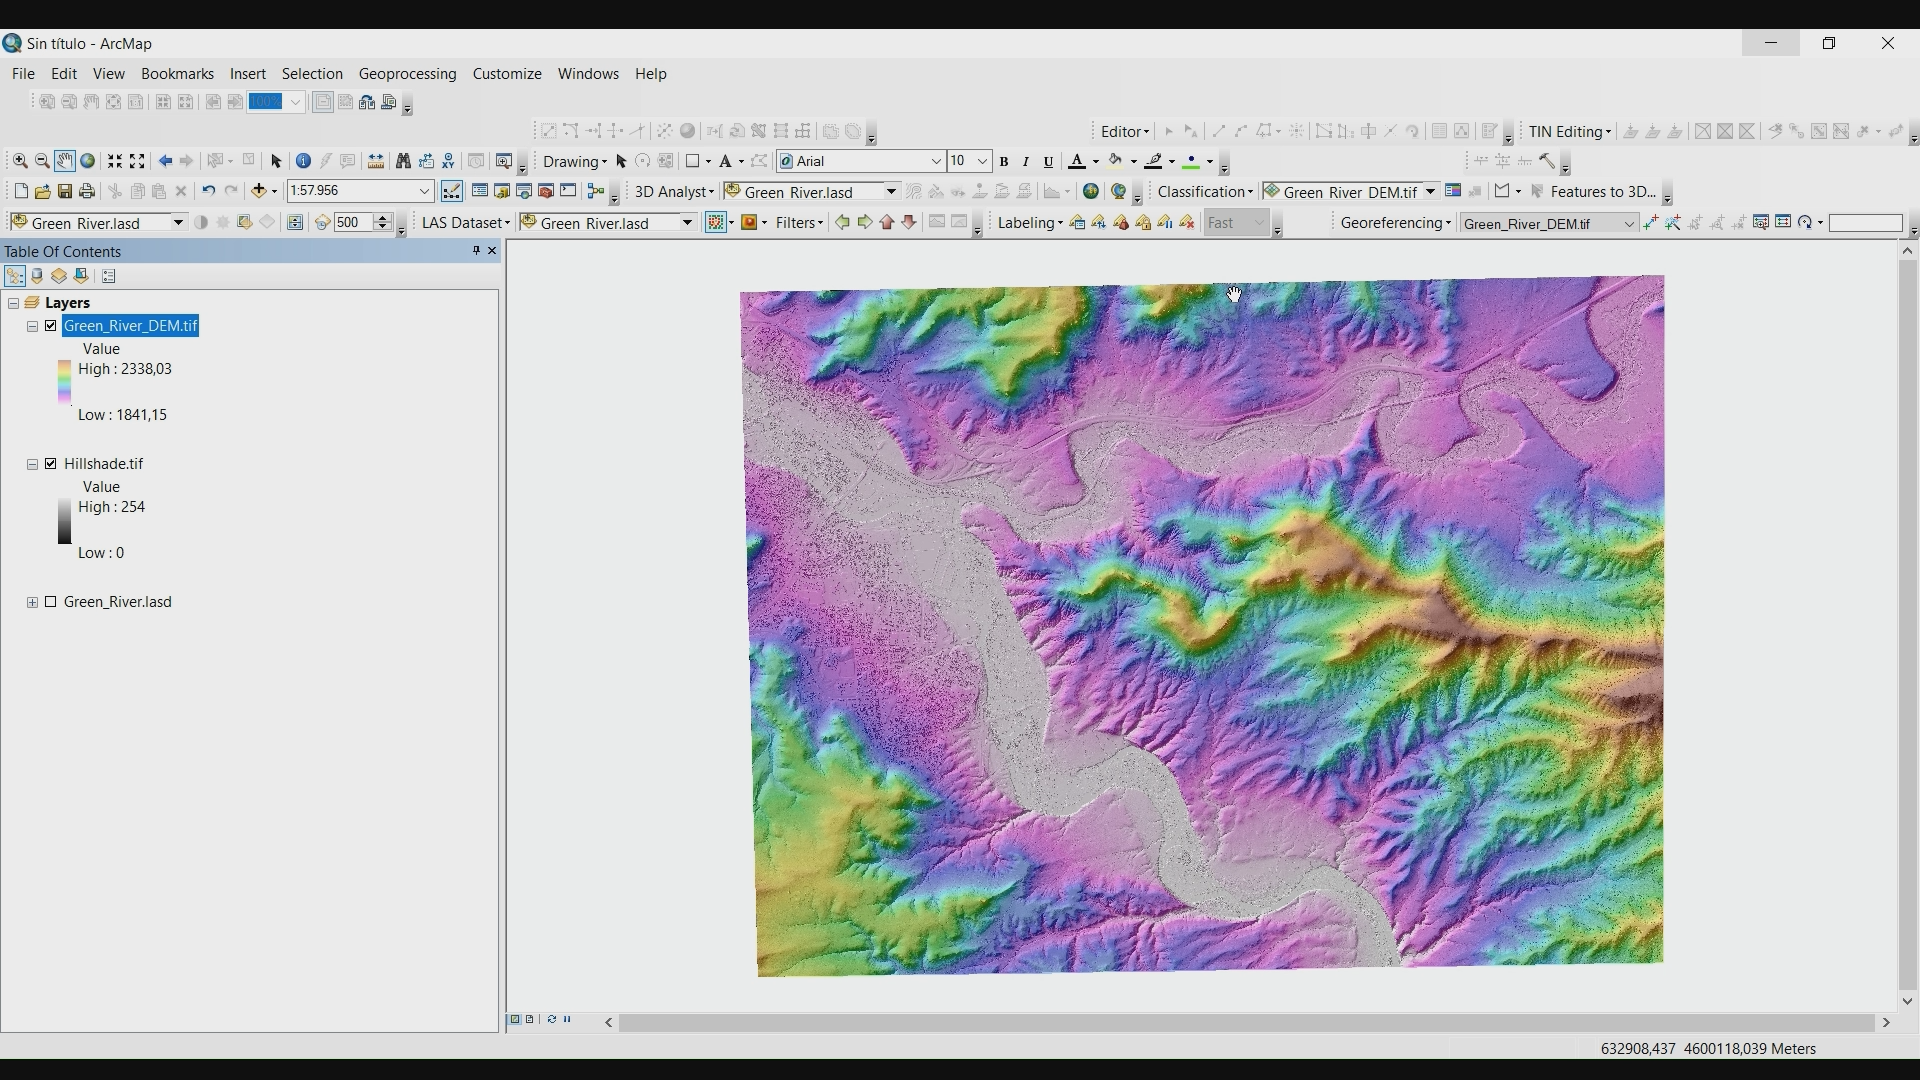 Create a Profile from LAS File in ArcGIS - Change Symbology (Colour Ramp and Transparency) on DEM